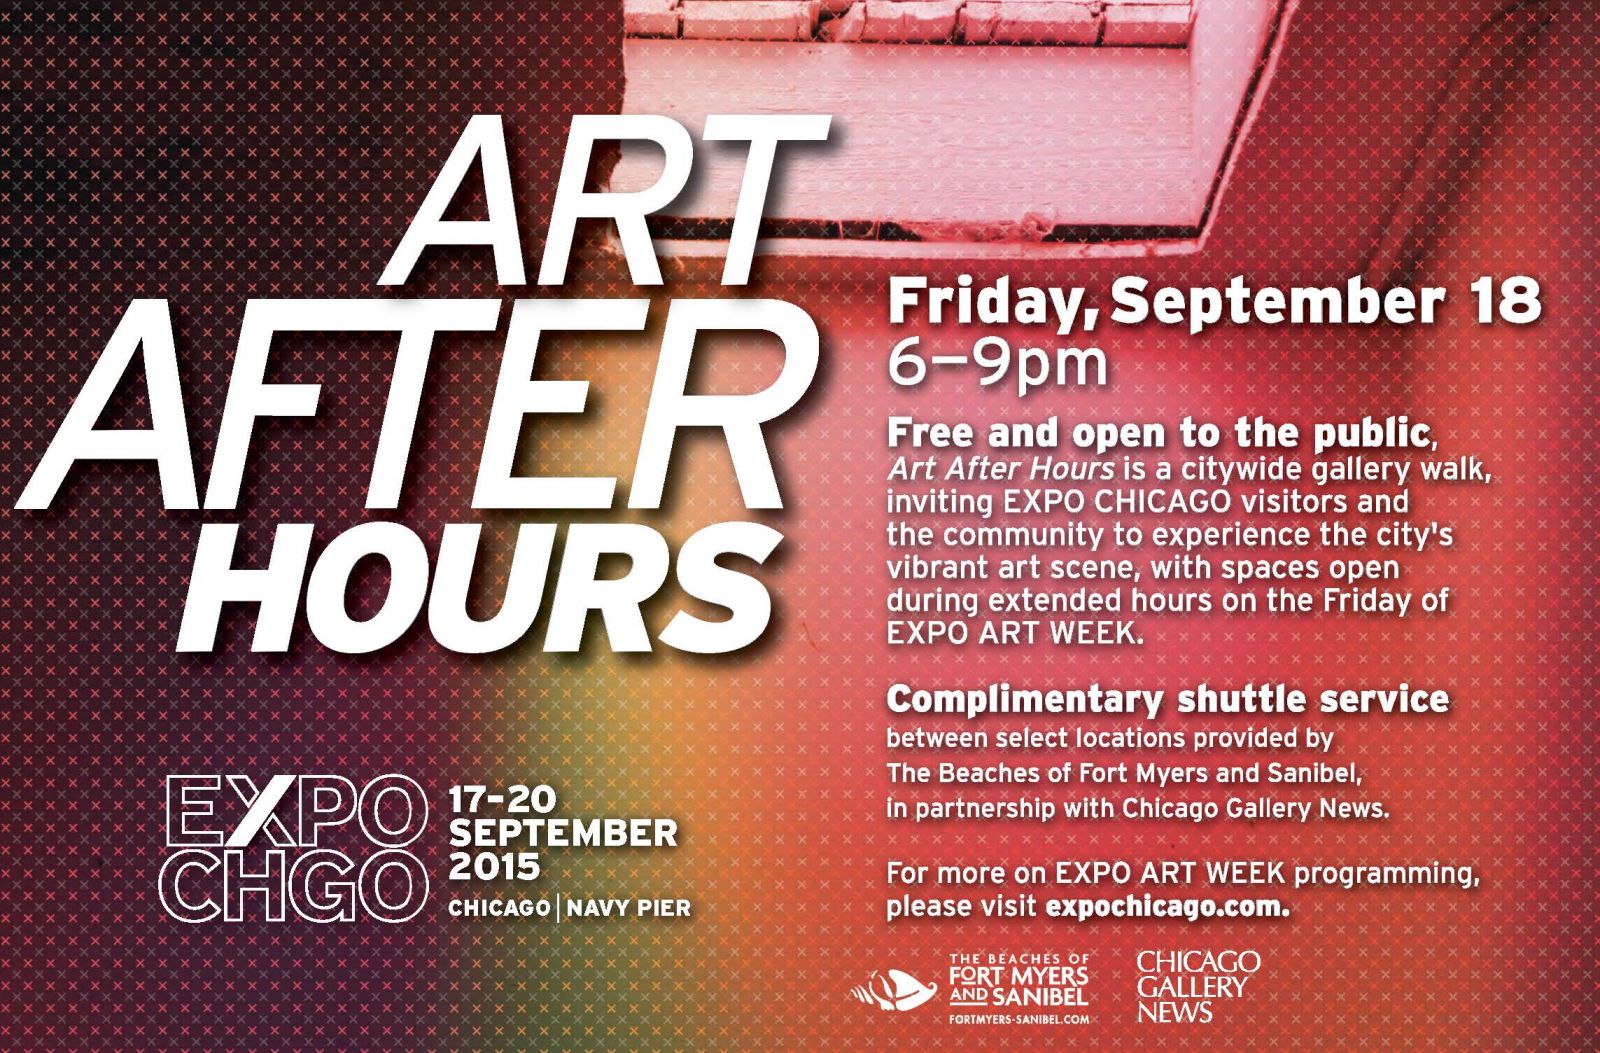 EXPO, Art After Hours